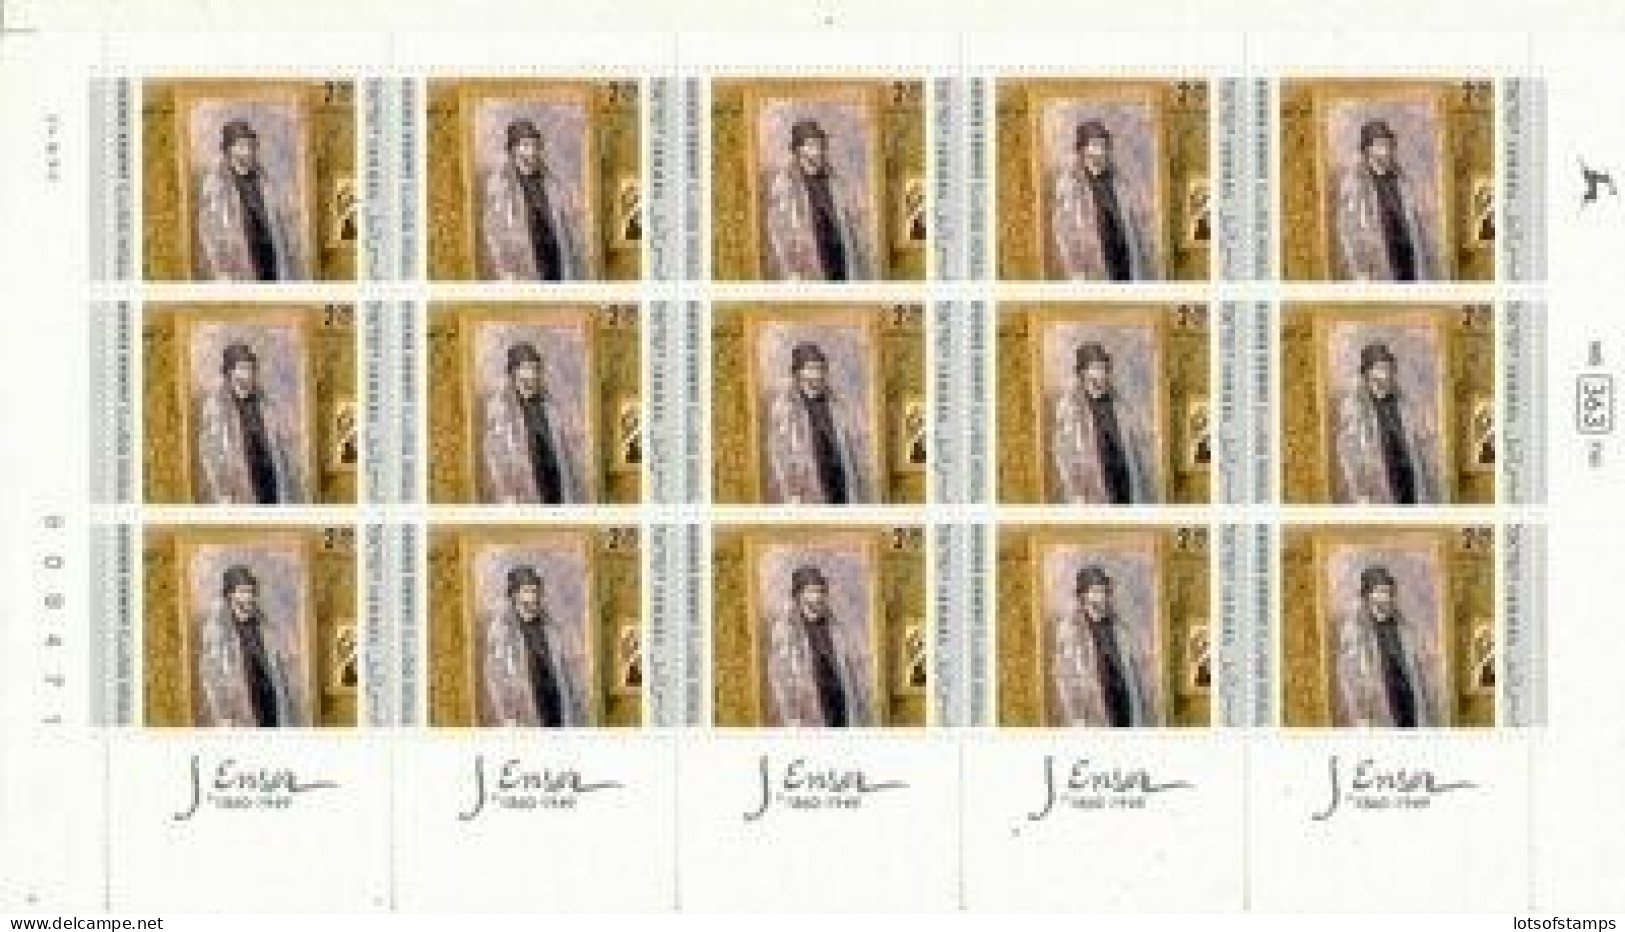 ISRAEL 1999 JOINT ISSUE WITH J. ENSOR 15 STAMP BELGIUM SHEET MNH - Covers & Documents